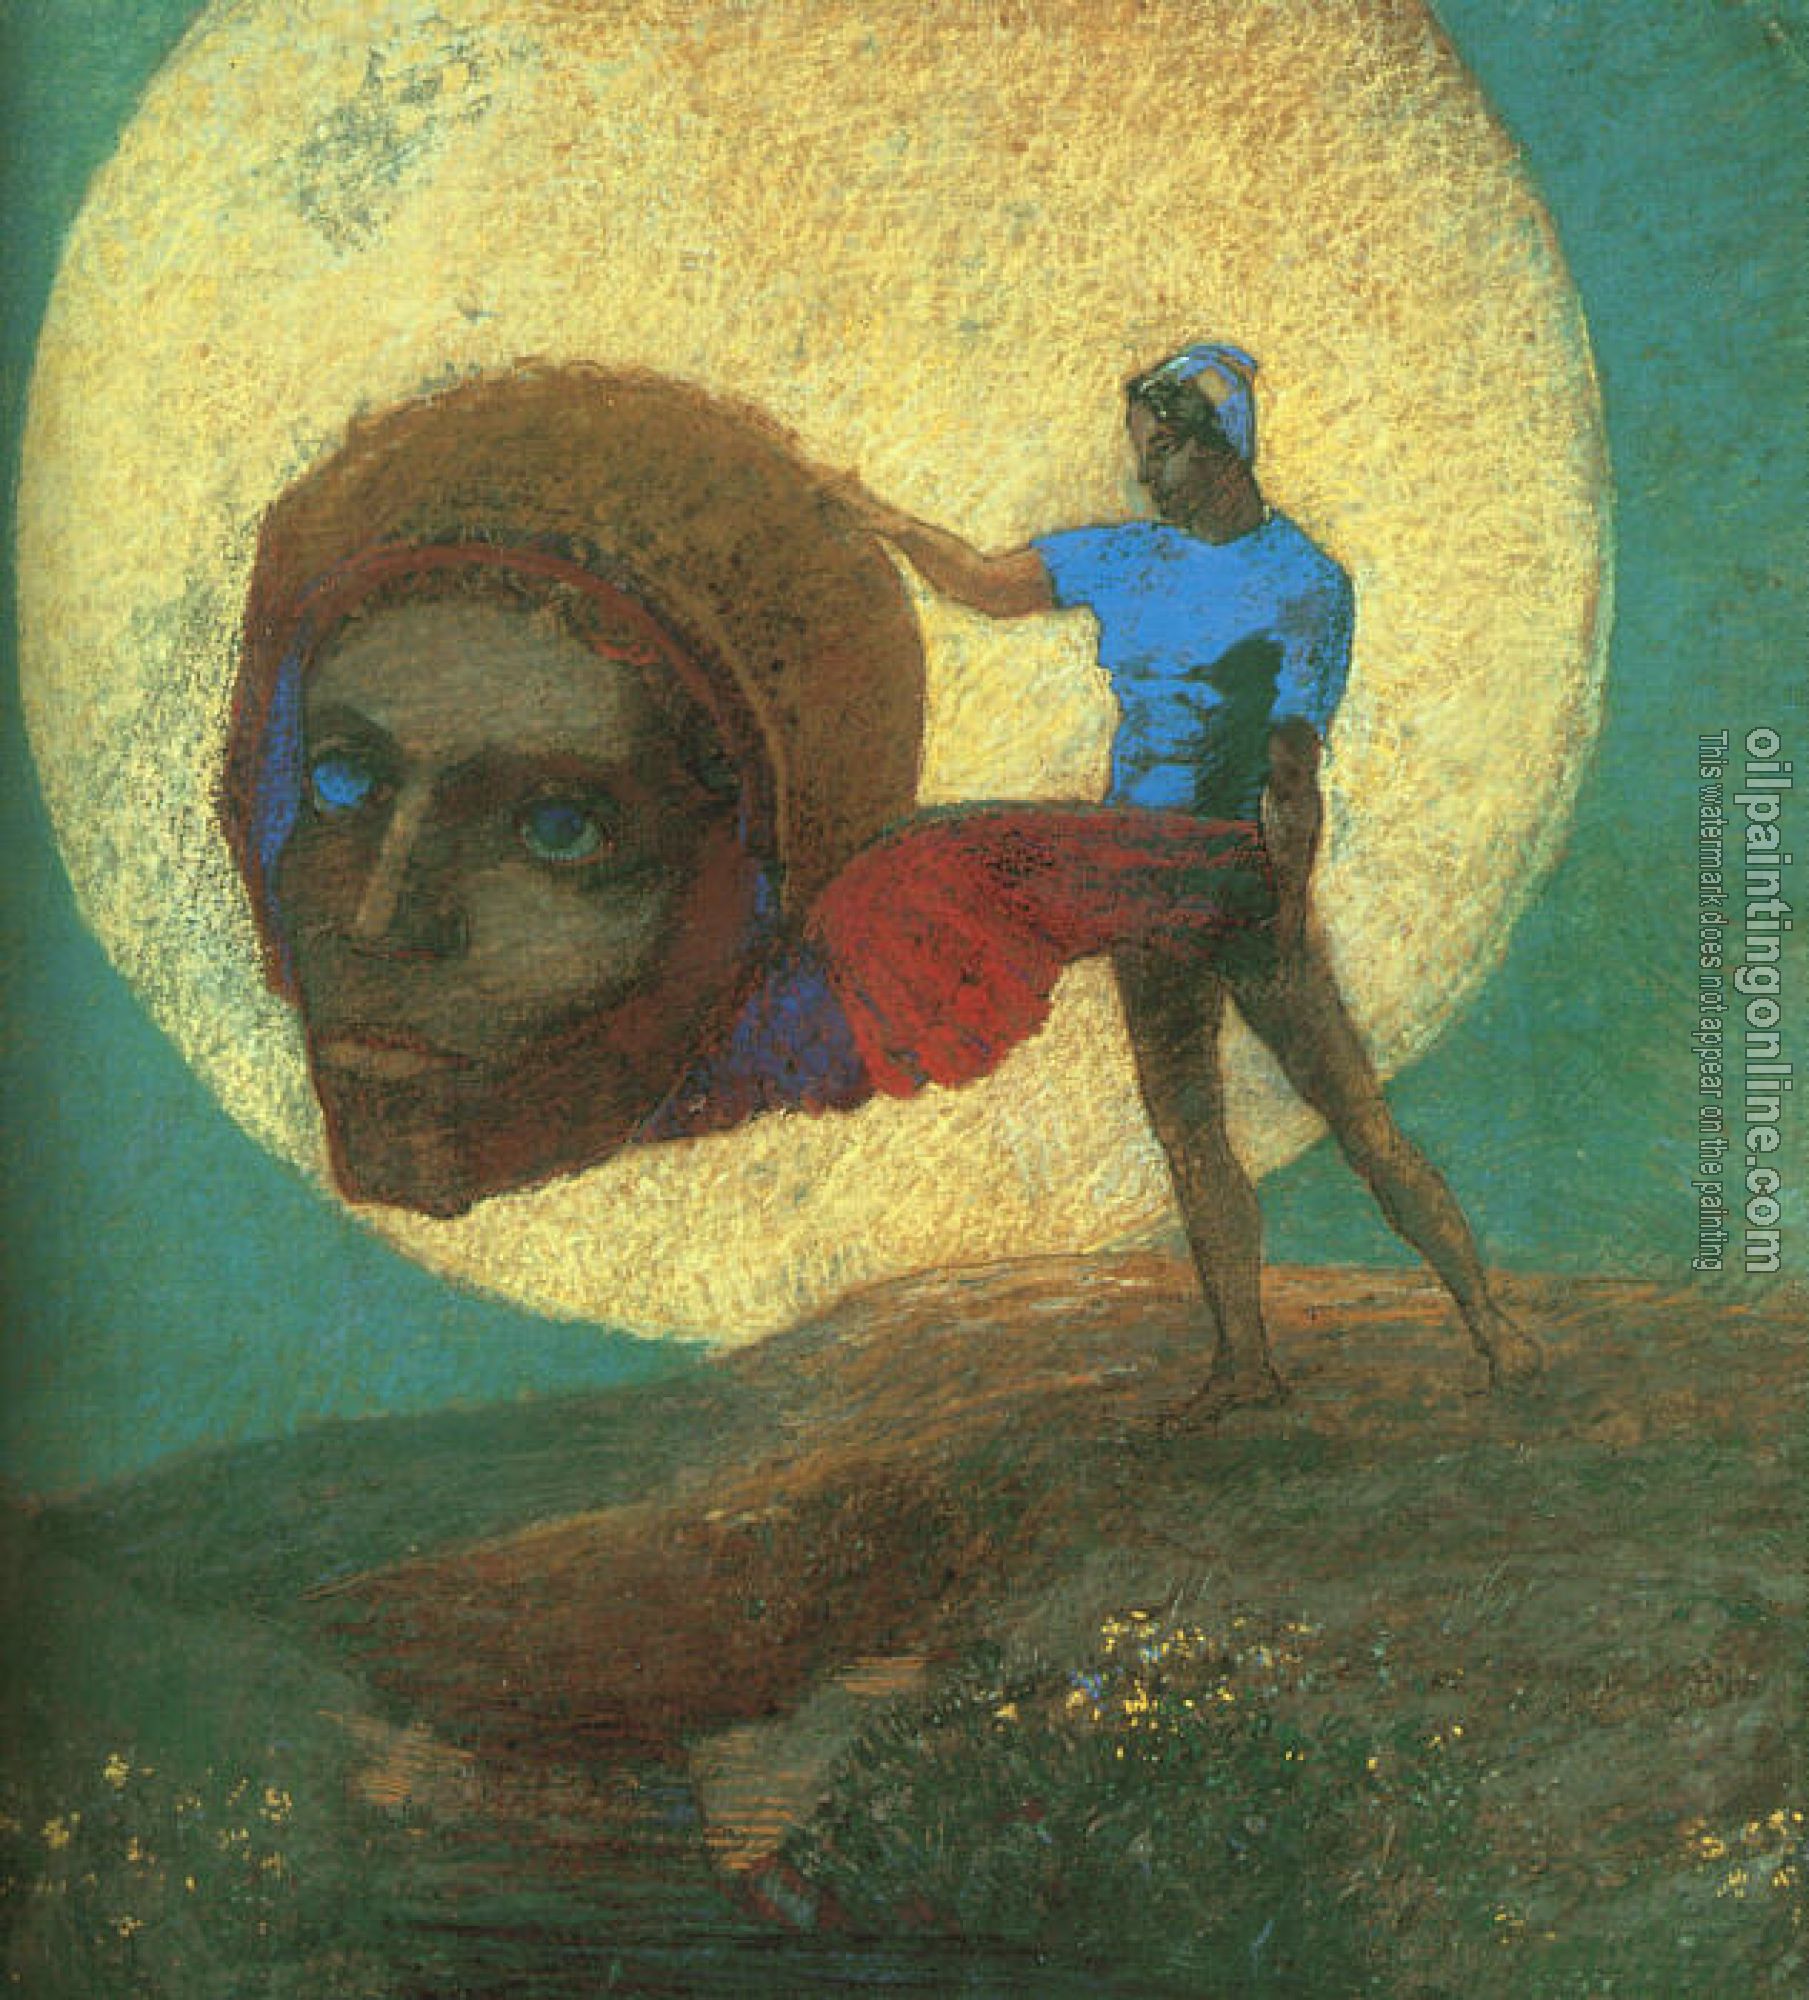 Redon, Odilon - The Fall of Icarus